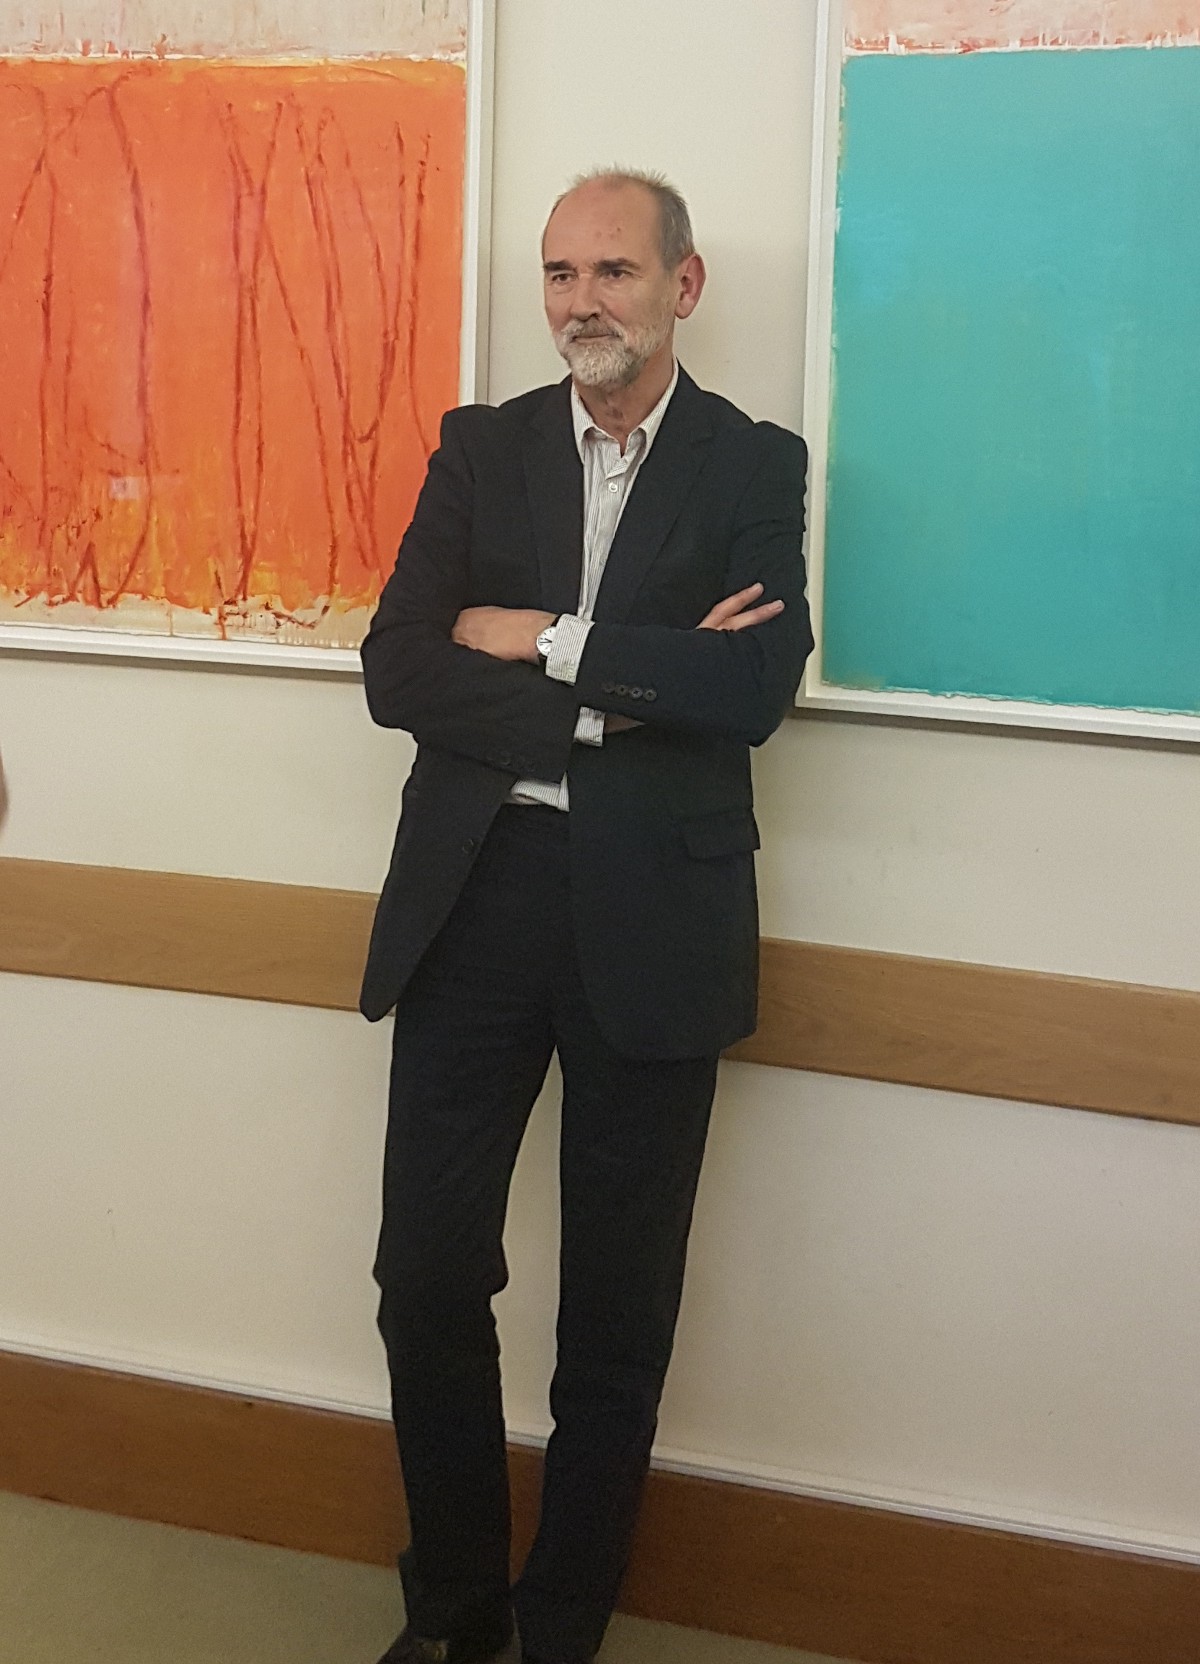 Christopher Le Brun, artist and President of the Royal Academy of Arts